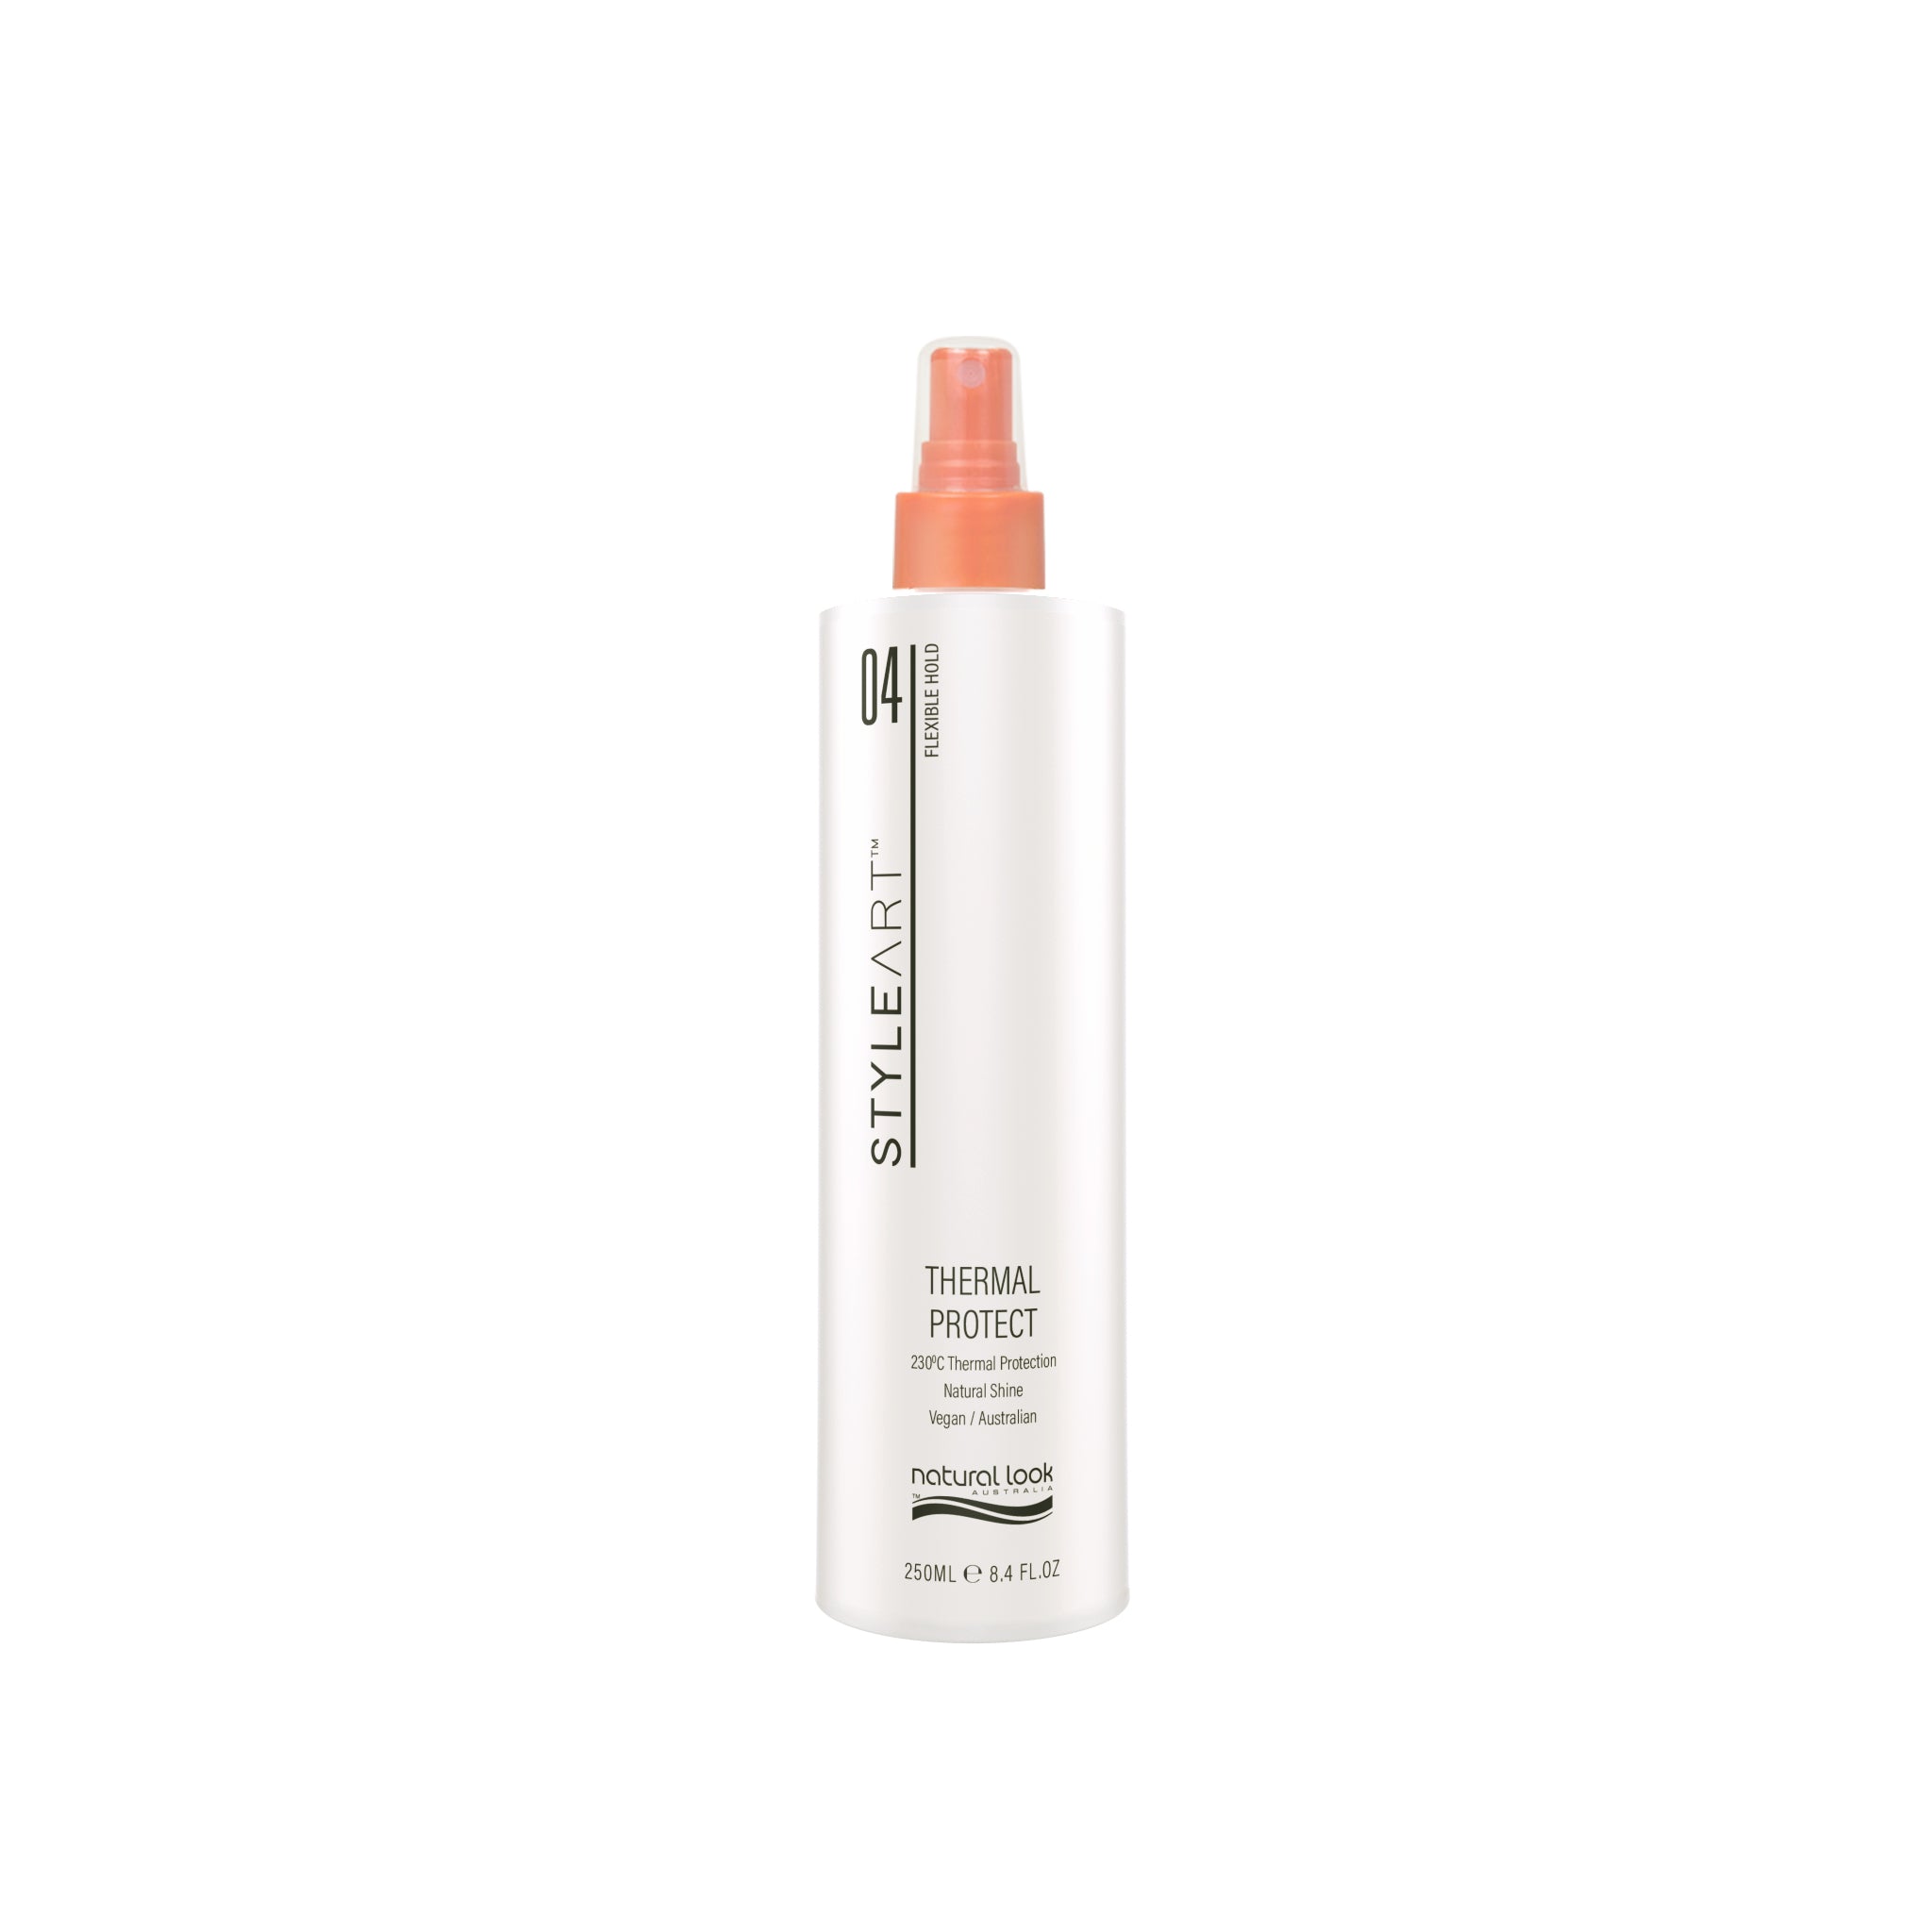 Natural Look StyleArt Thermal Protect 250mL [was Prime Time]